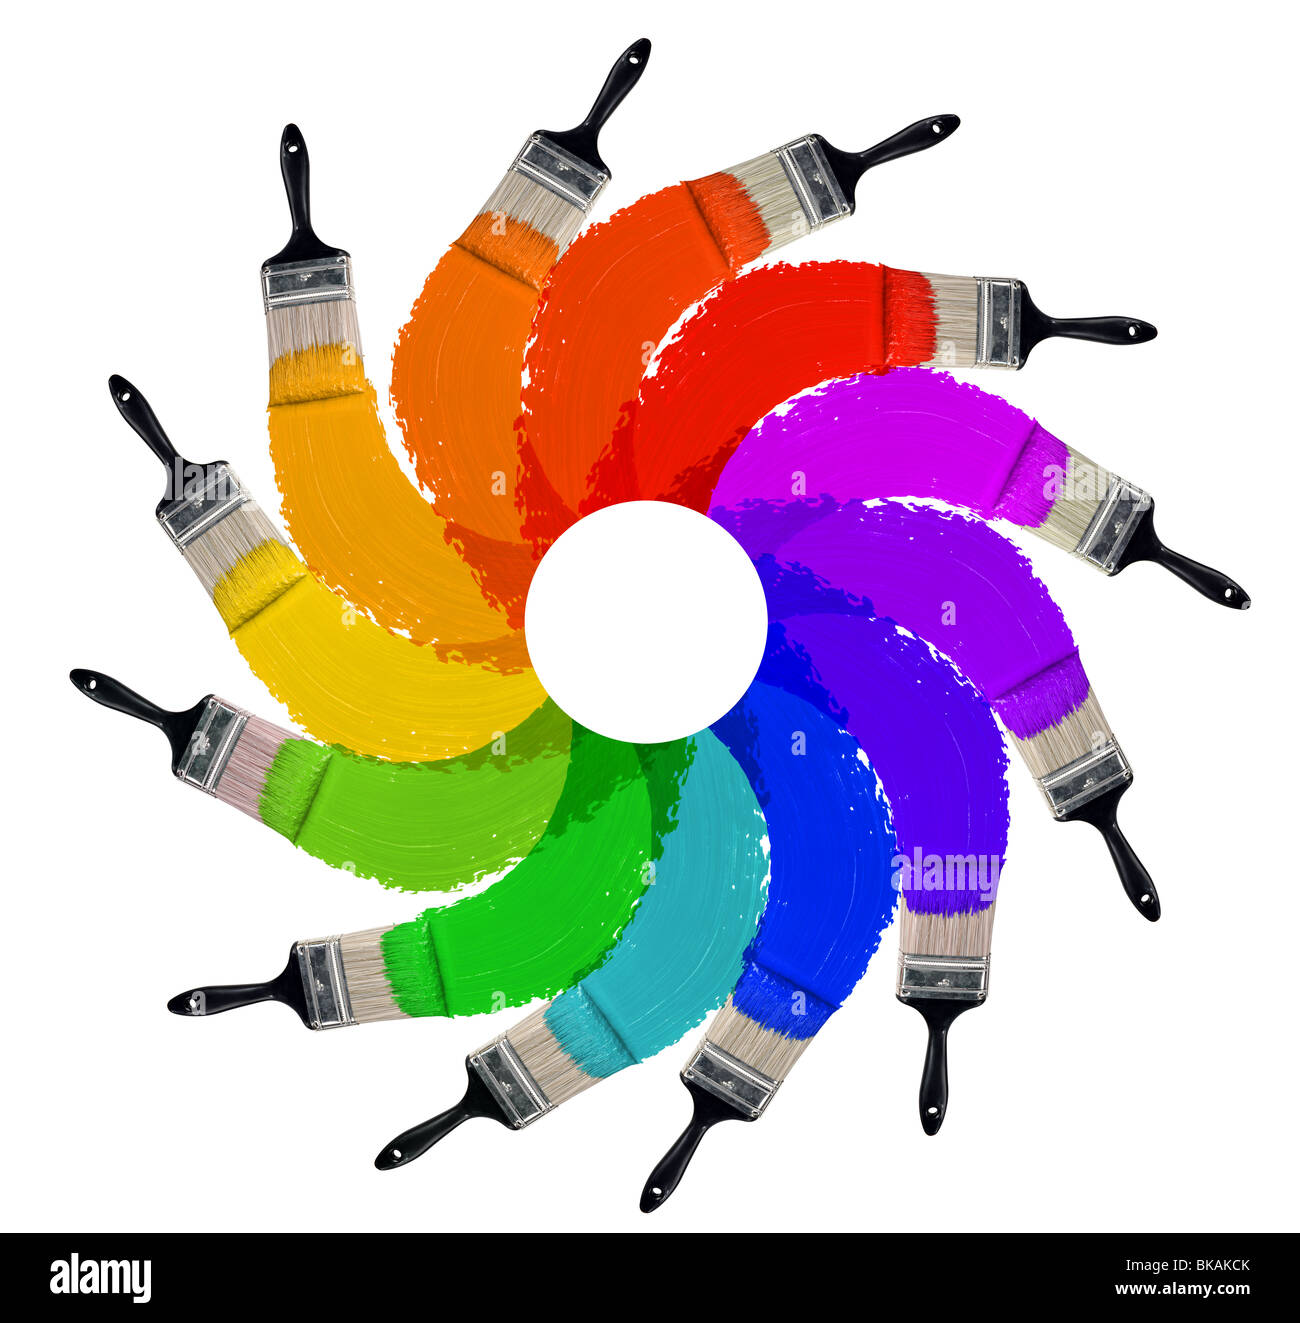 Brushes with twelve different colors isolated over white background Stock Photo